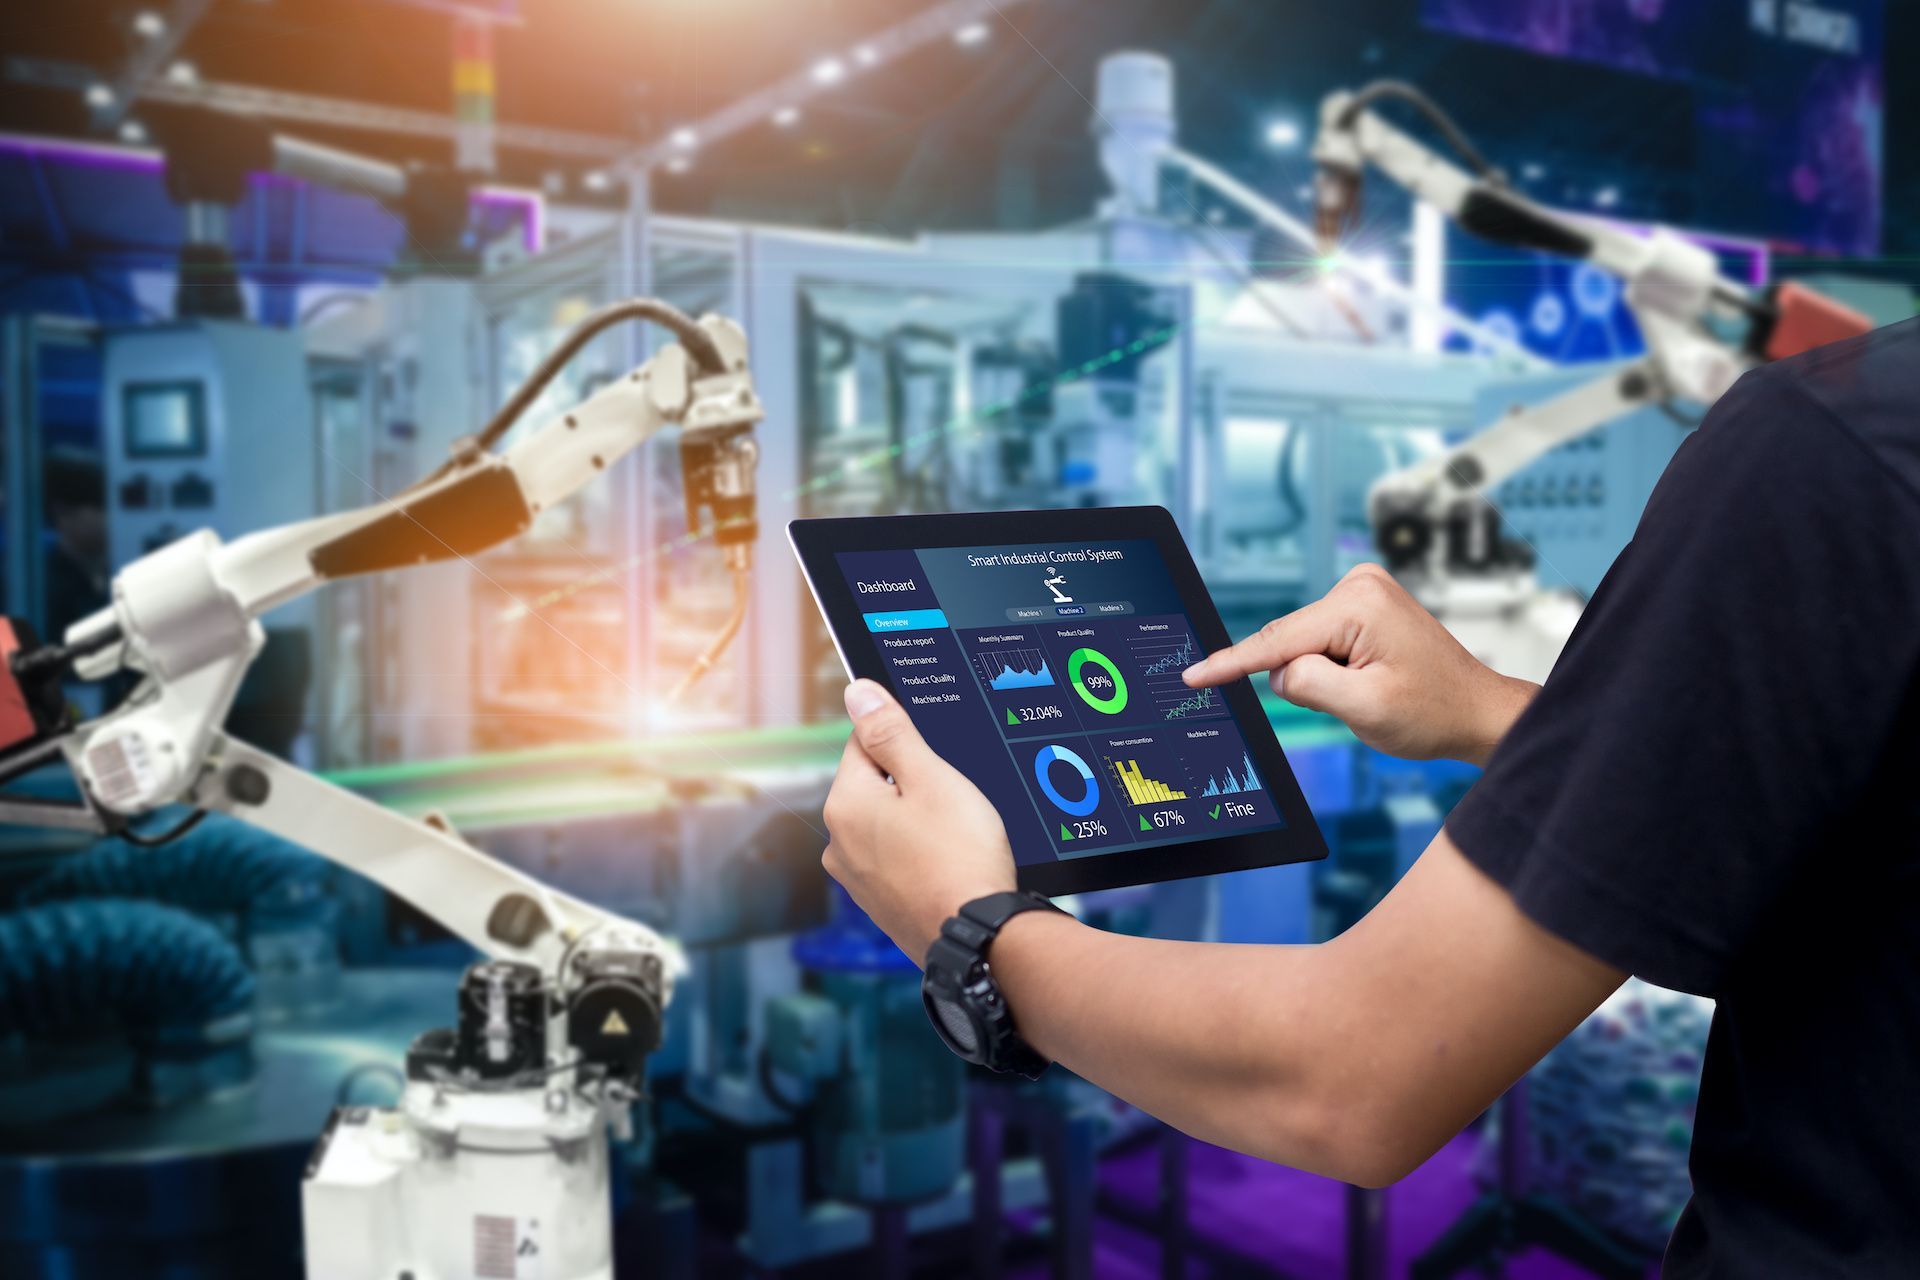 ⚙️ How connected sensors revolutionize industrial and hydraulic systems